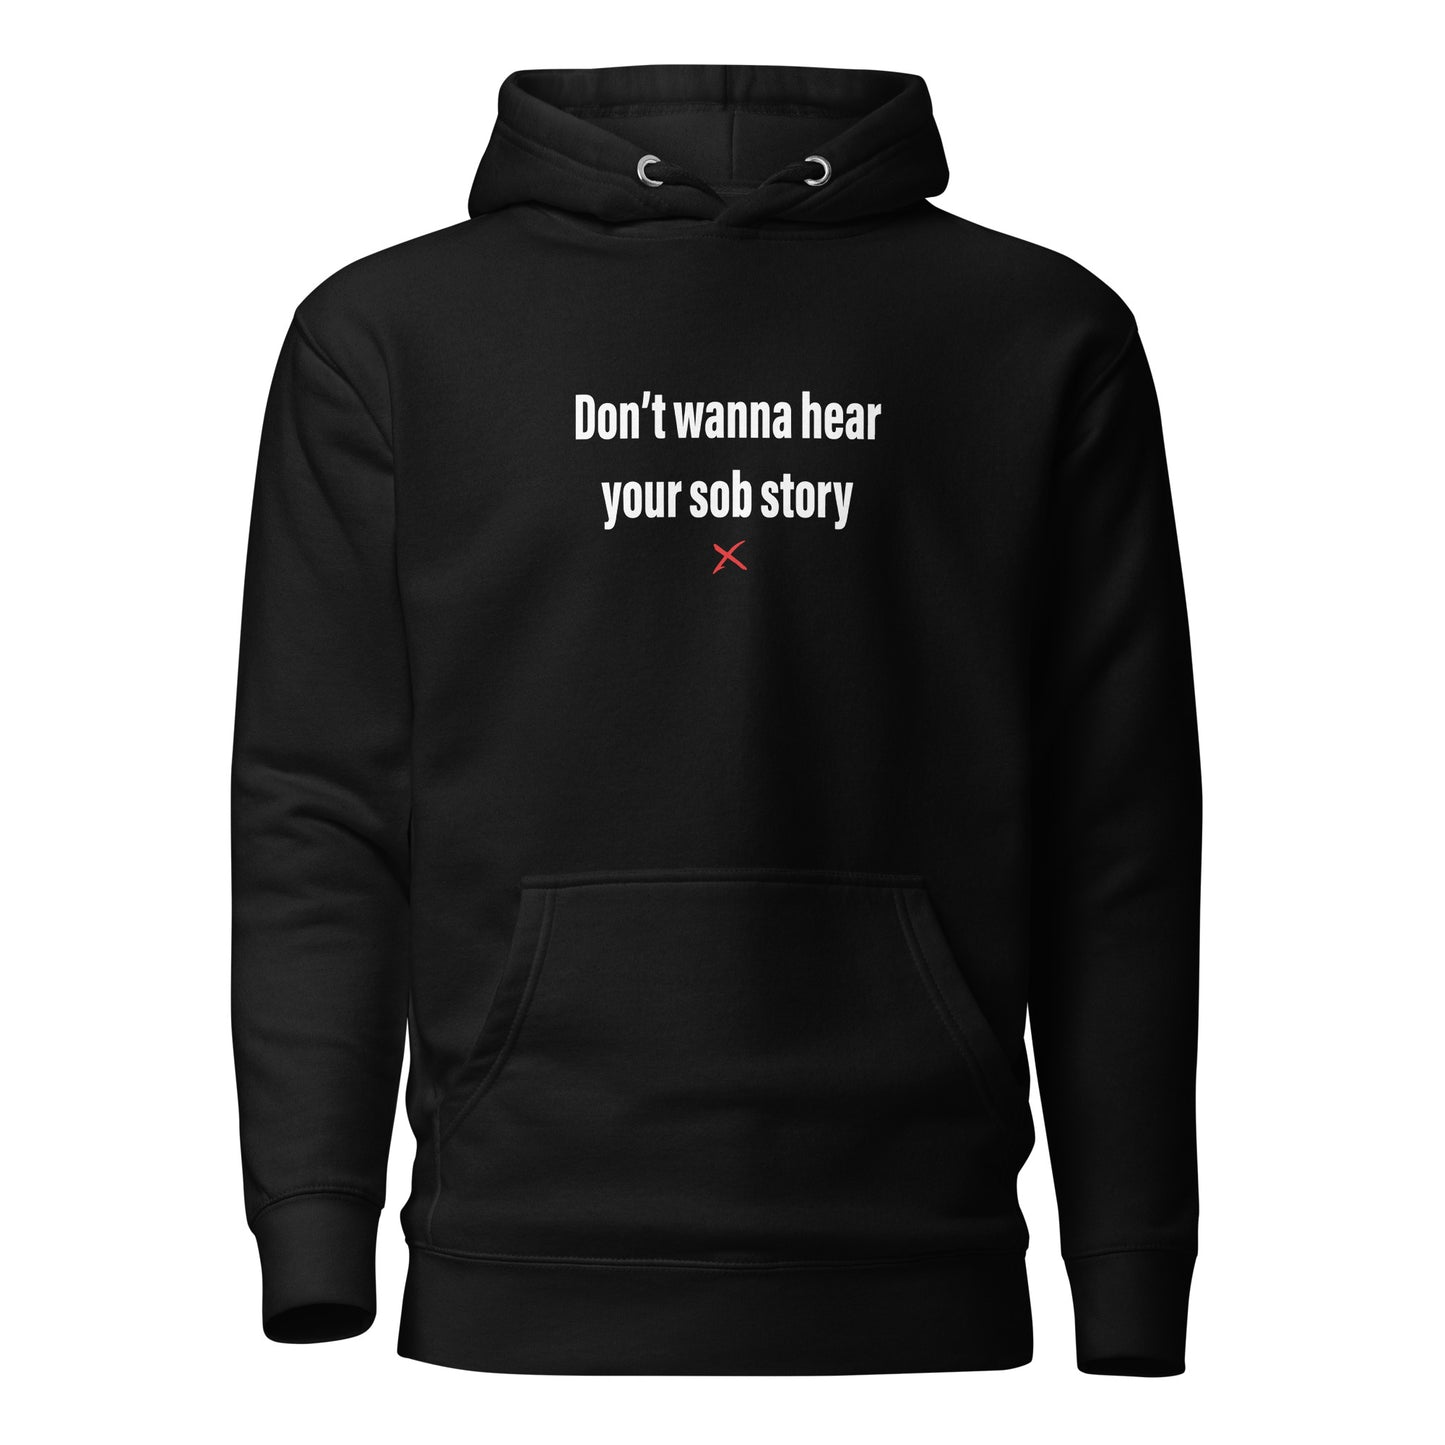 Don't wanna hear your sob story - Hoodie